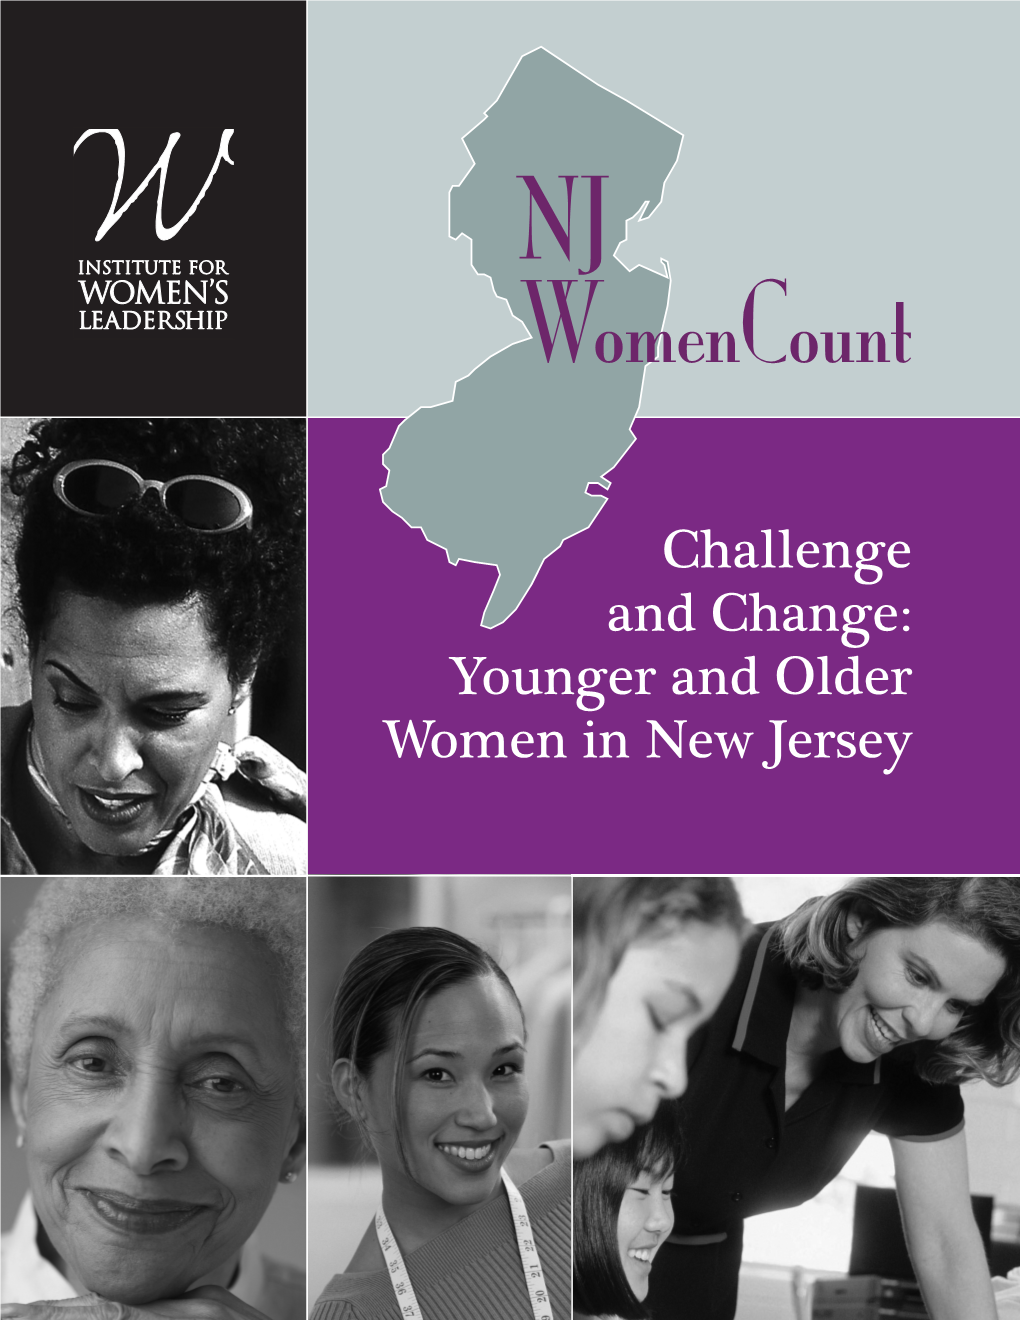 Challenge and Change: Younger and Older Women in New Jersey